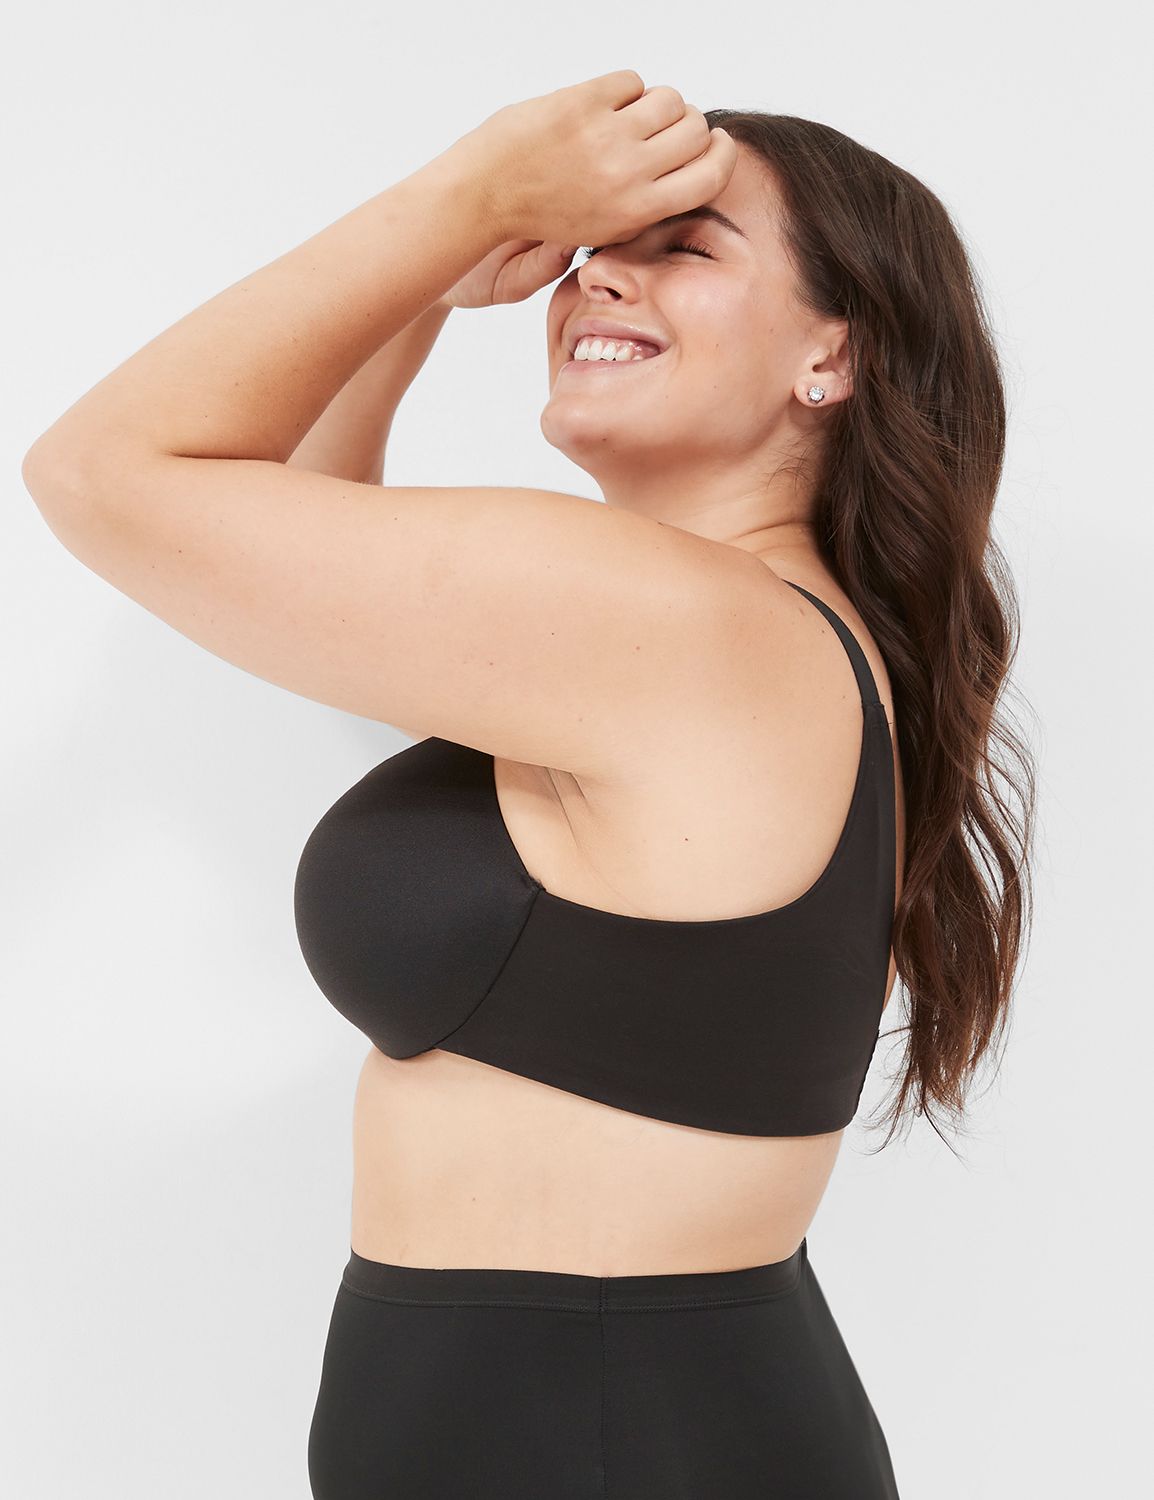 I had to wear two XXL sports bras for 42F breasts, now I've been